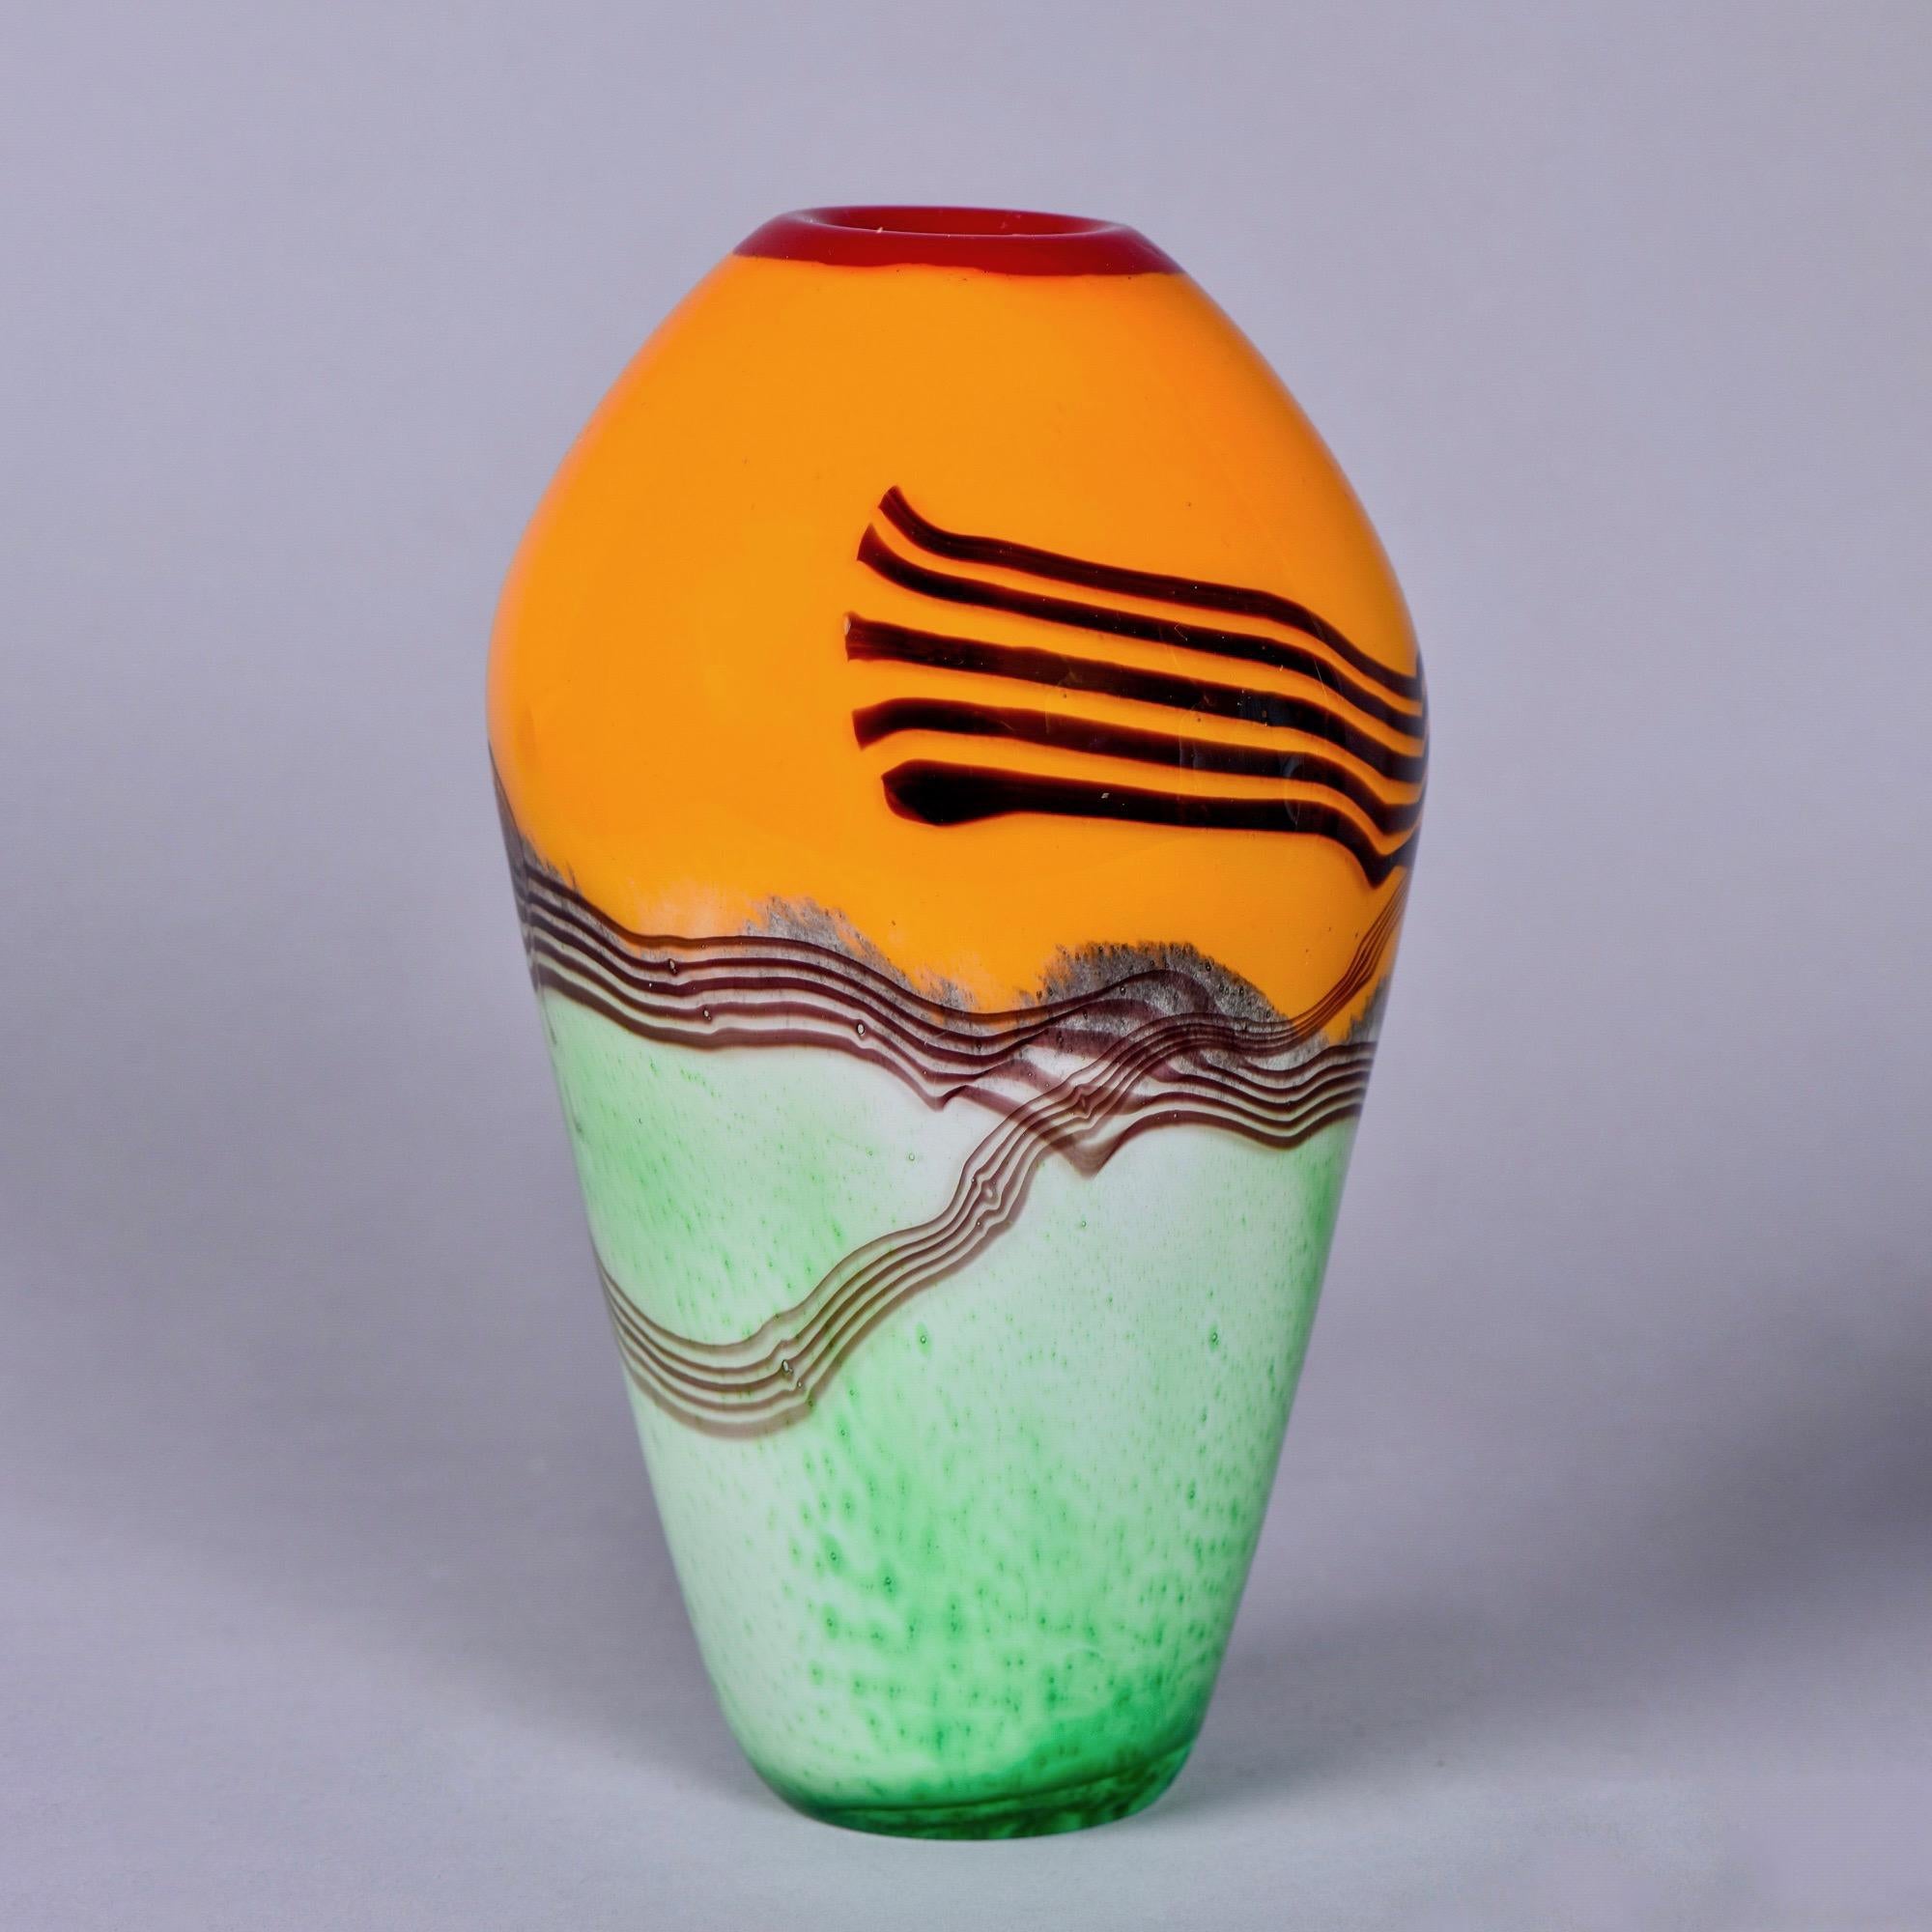 Italian Murano Glass Vase in Tangerine and Mint with Black Stripes and Red Lip